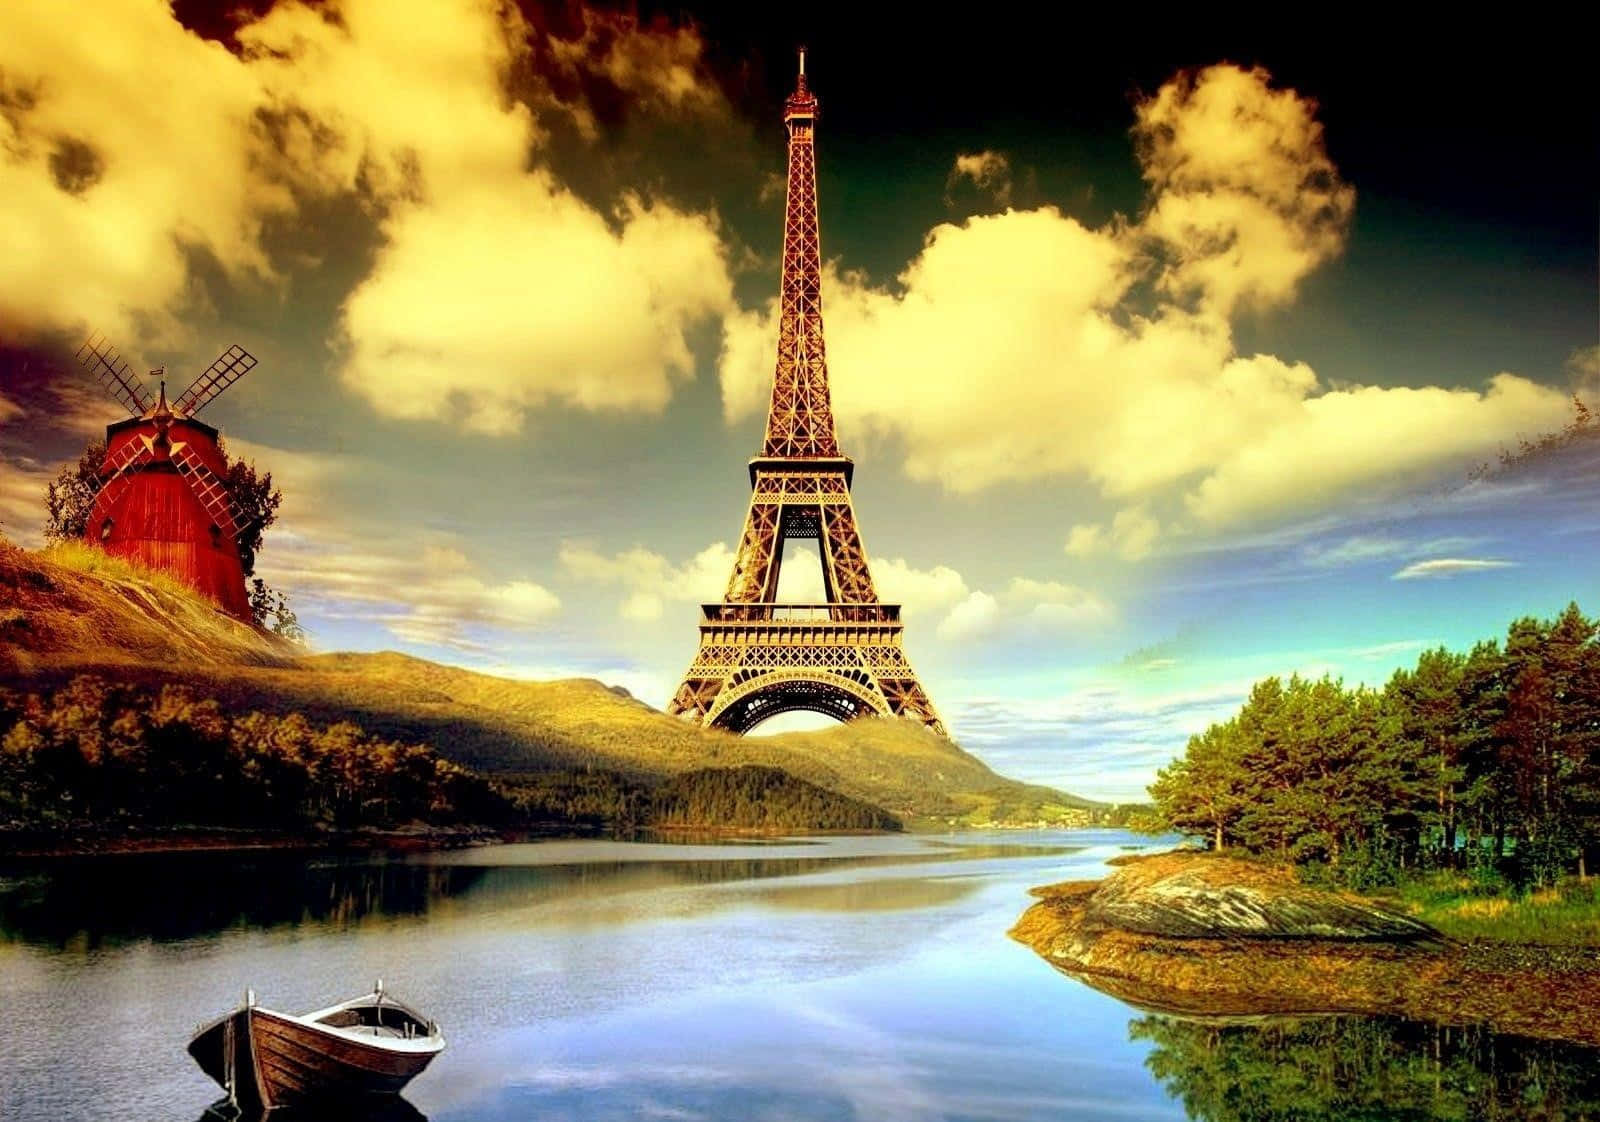 The Iconic Eiffel Tower in Paris, France